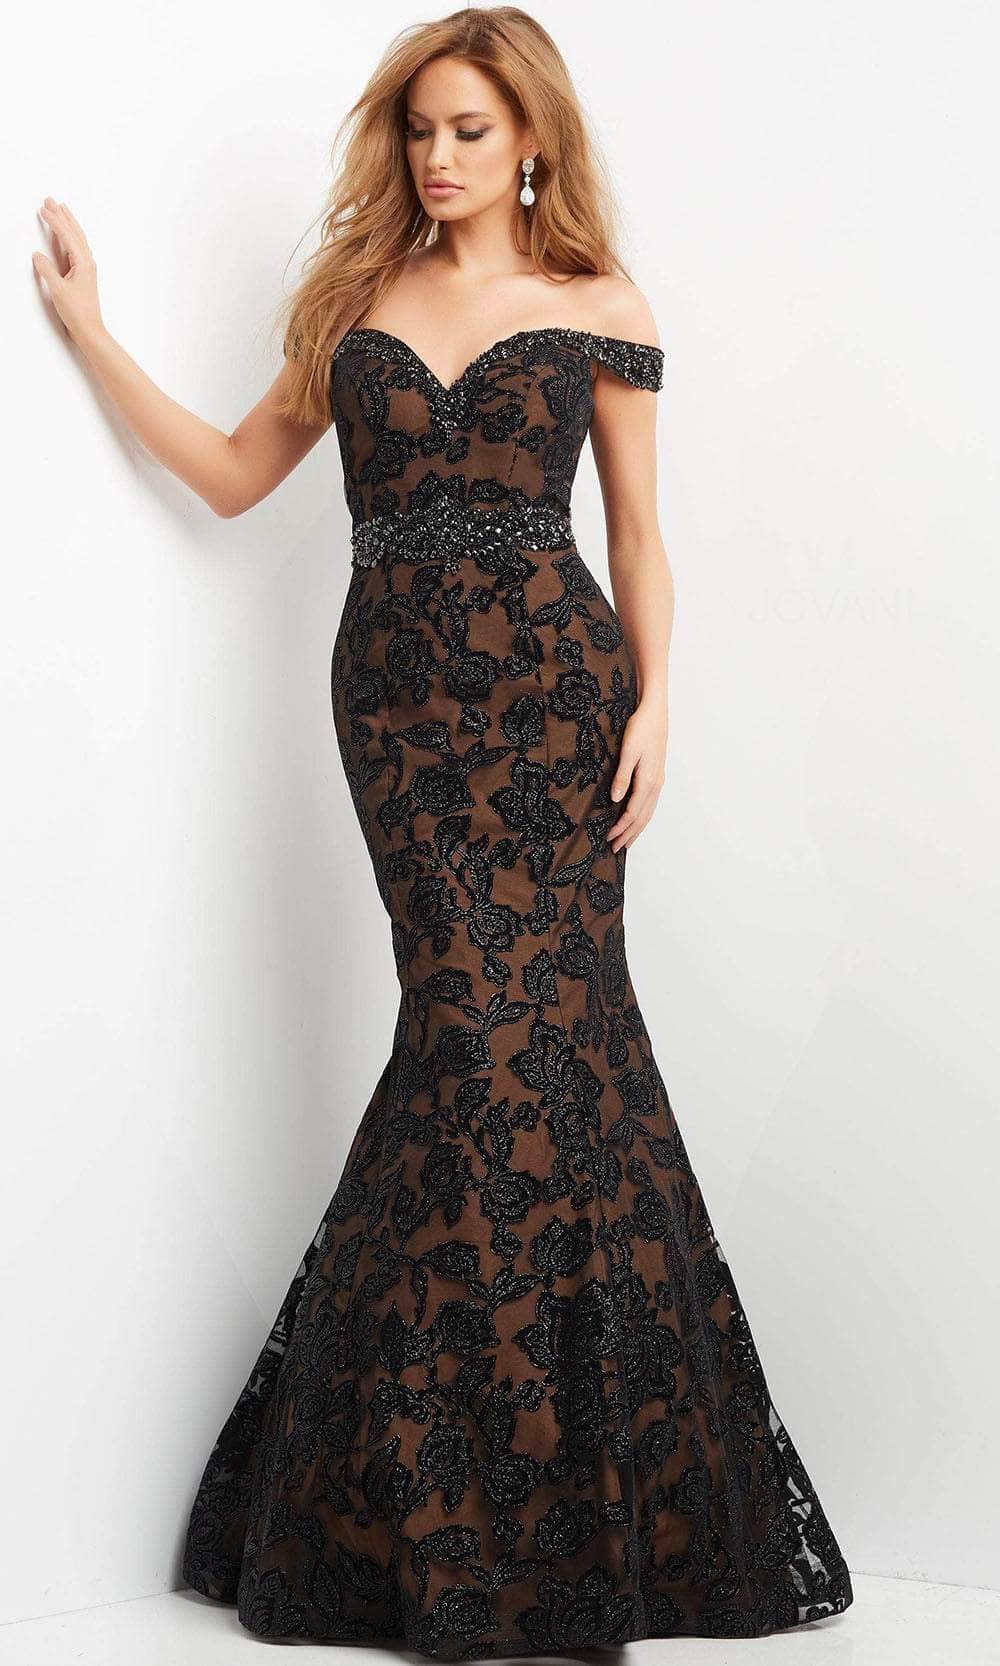 Jovani 07061 - Sweetheart Floral Mermaid Evening Gown Evening Dresses 00 / Black/Cafe